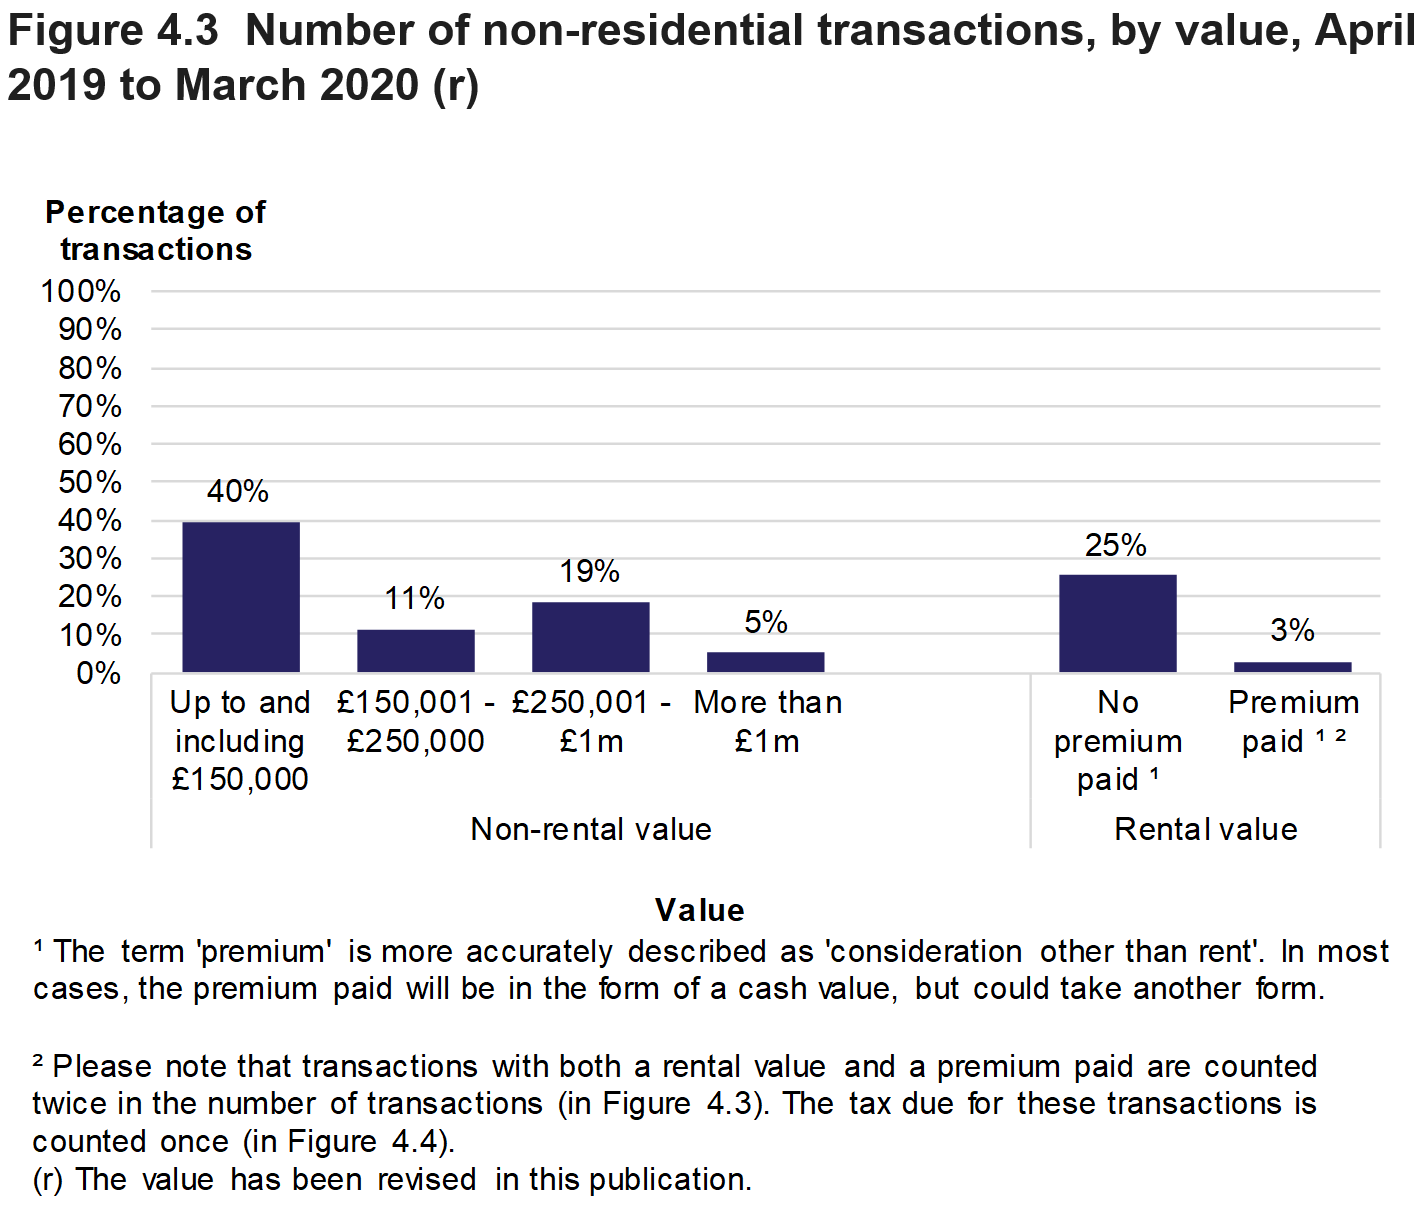 Figure 4.3 shows the number of non-residential transactions by value of the property. Data is presented as the percentage of transactions and relates to transactions effective in April 2019 to March 2020.